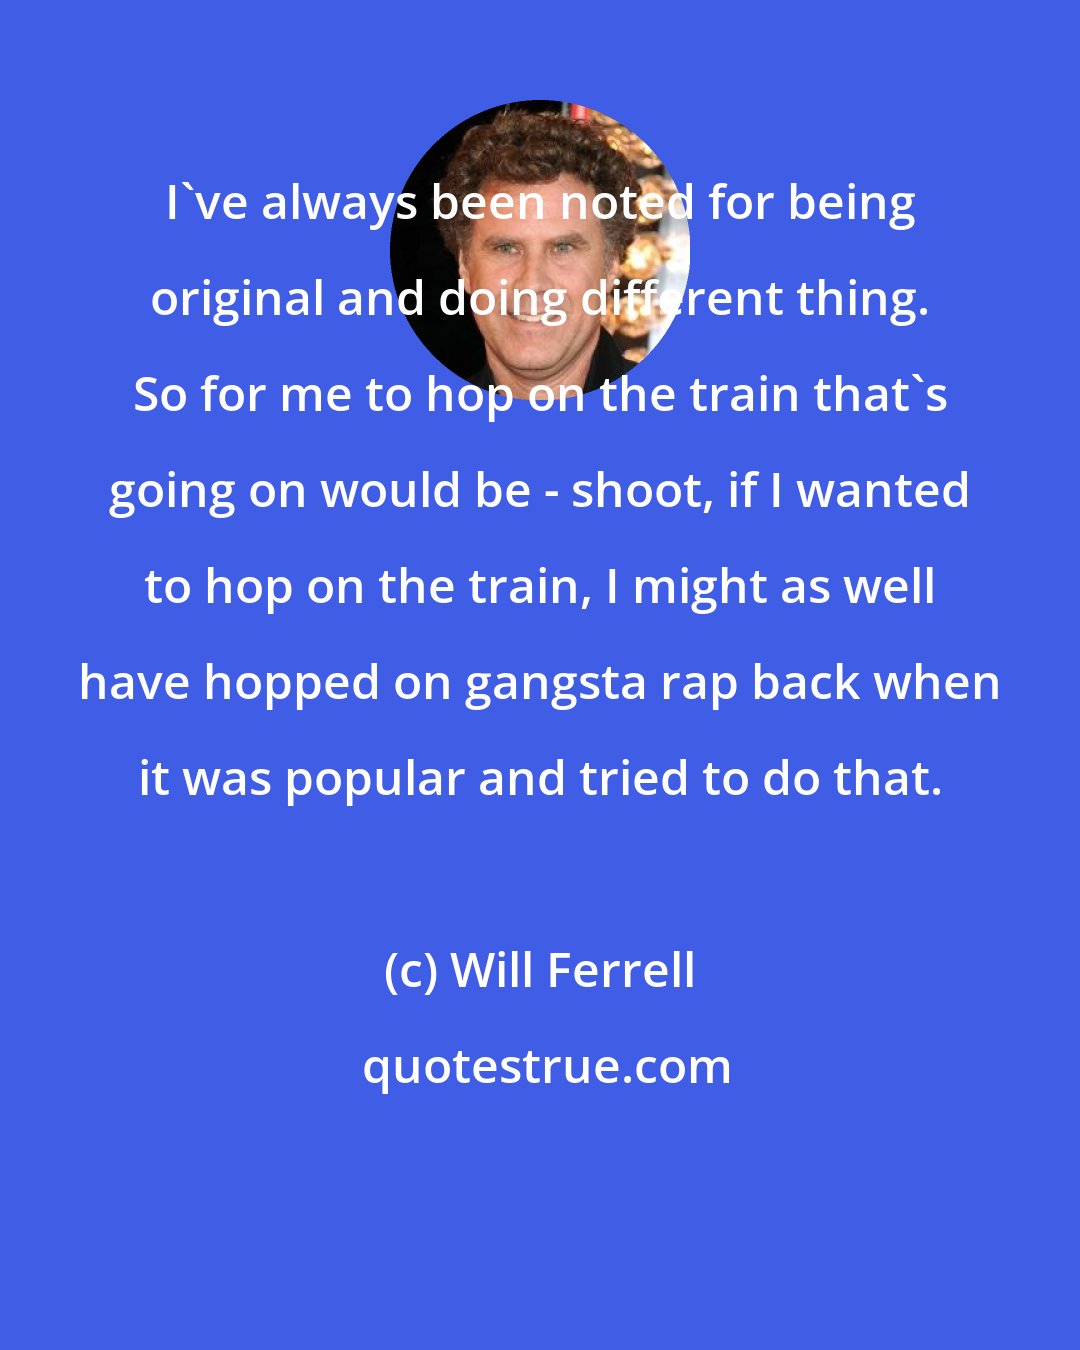 Will Ferrell: I've always been noted for being original and doing different thing. So for me to hop on the train that's going on would be - shoot, if I wanted to hop on the train, I might as well have hopped on gangsta rap back when it was popular and tried to do that.